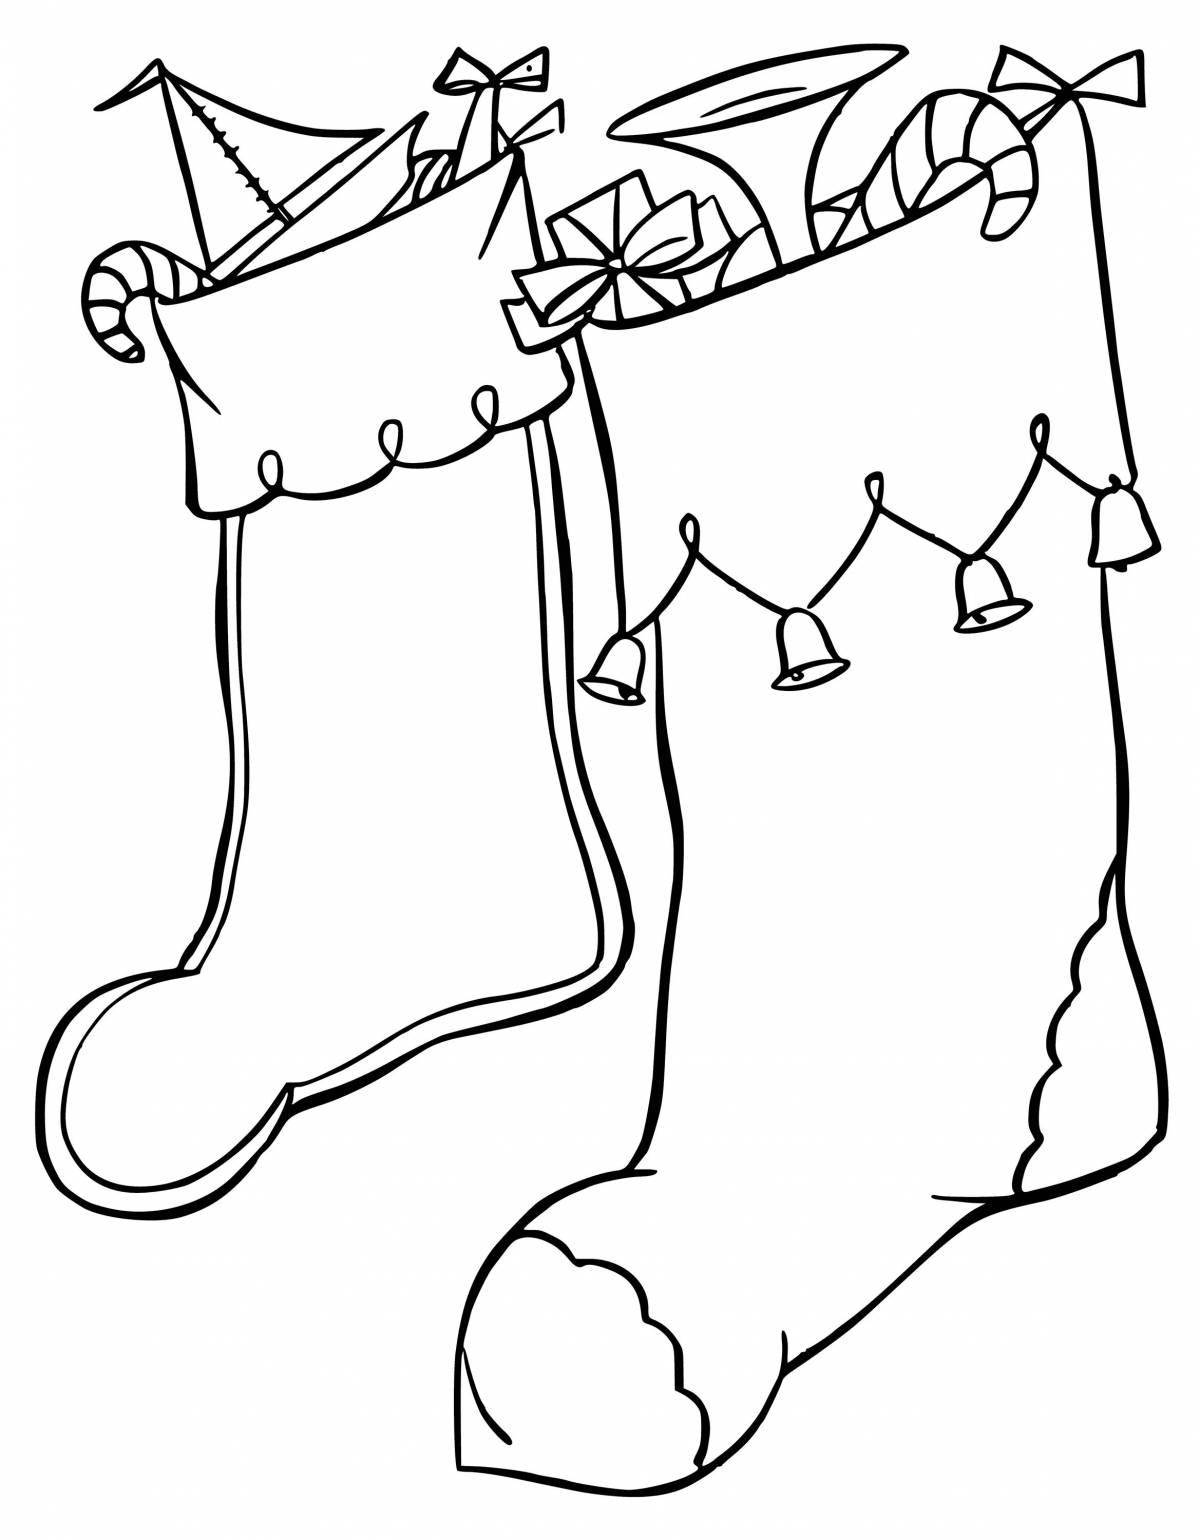 Colorful stocking coloring page